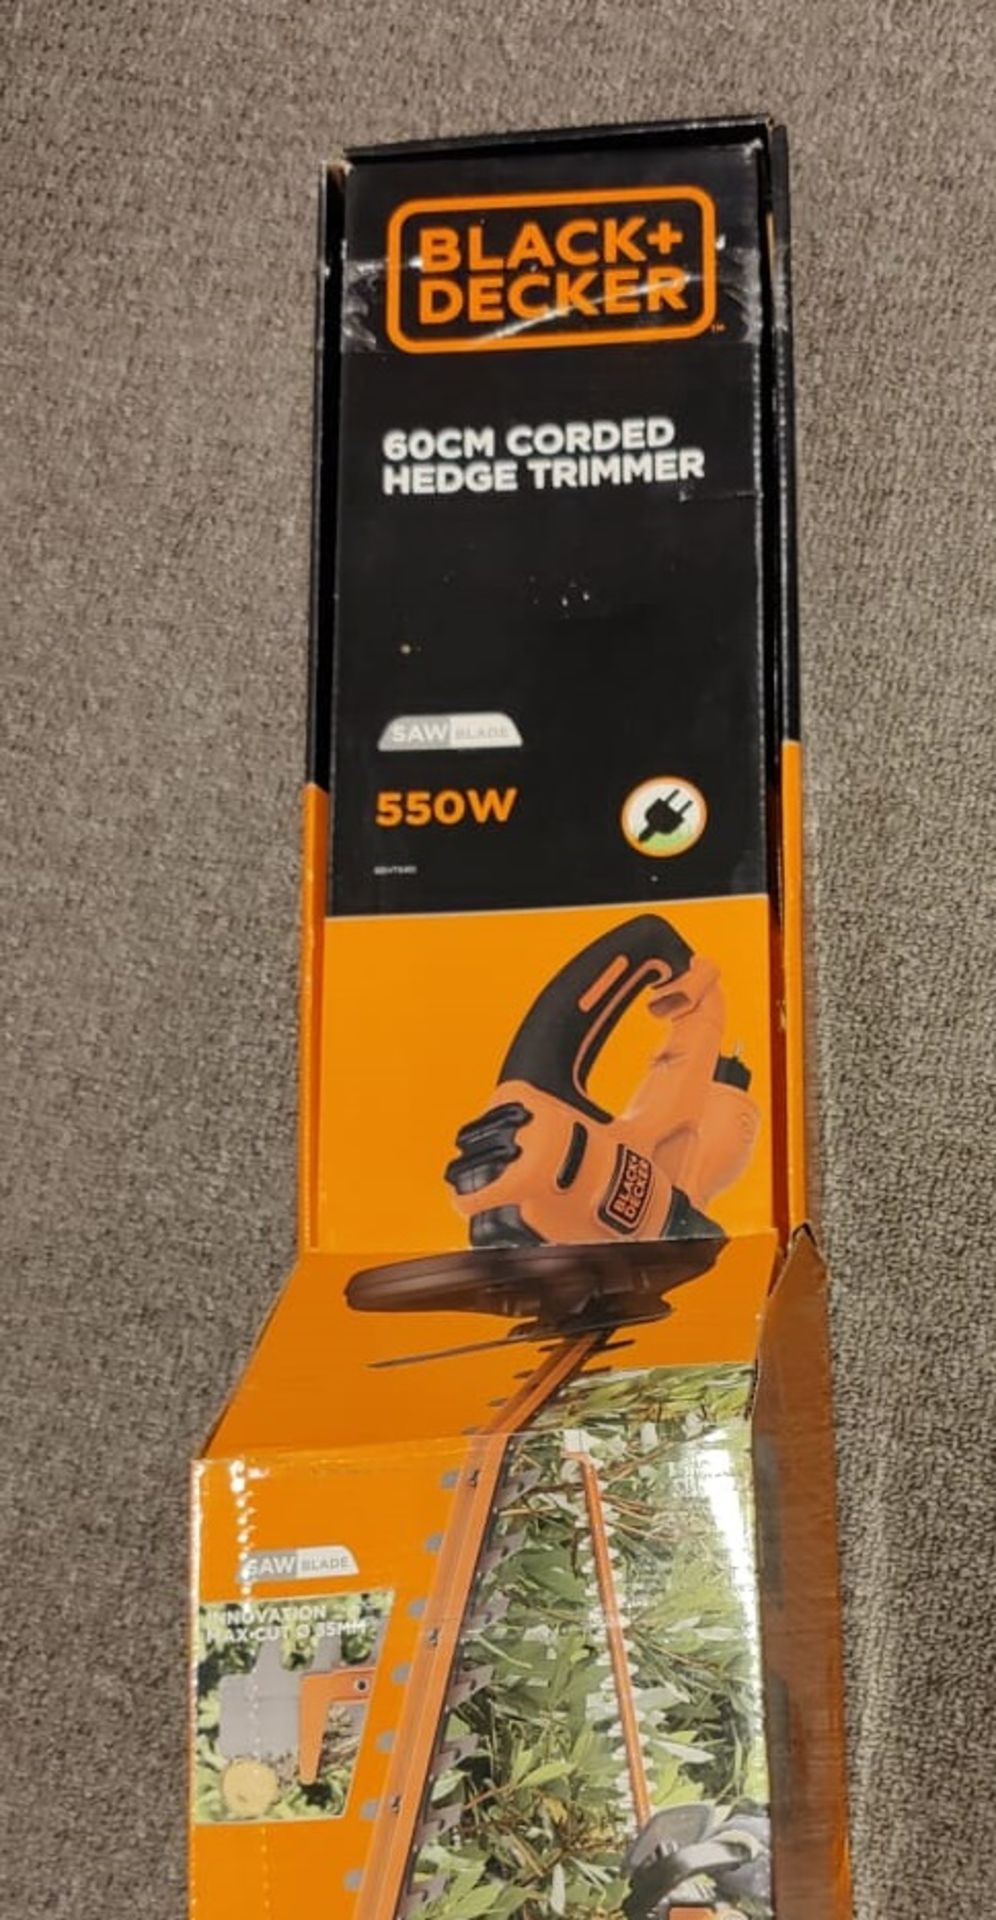 1 x Black & Decker 60cm Corded Hedge Trimmer - 550W - New and Boxed - Image 2 of 4